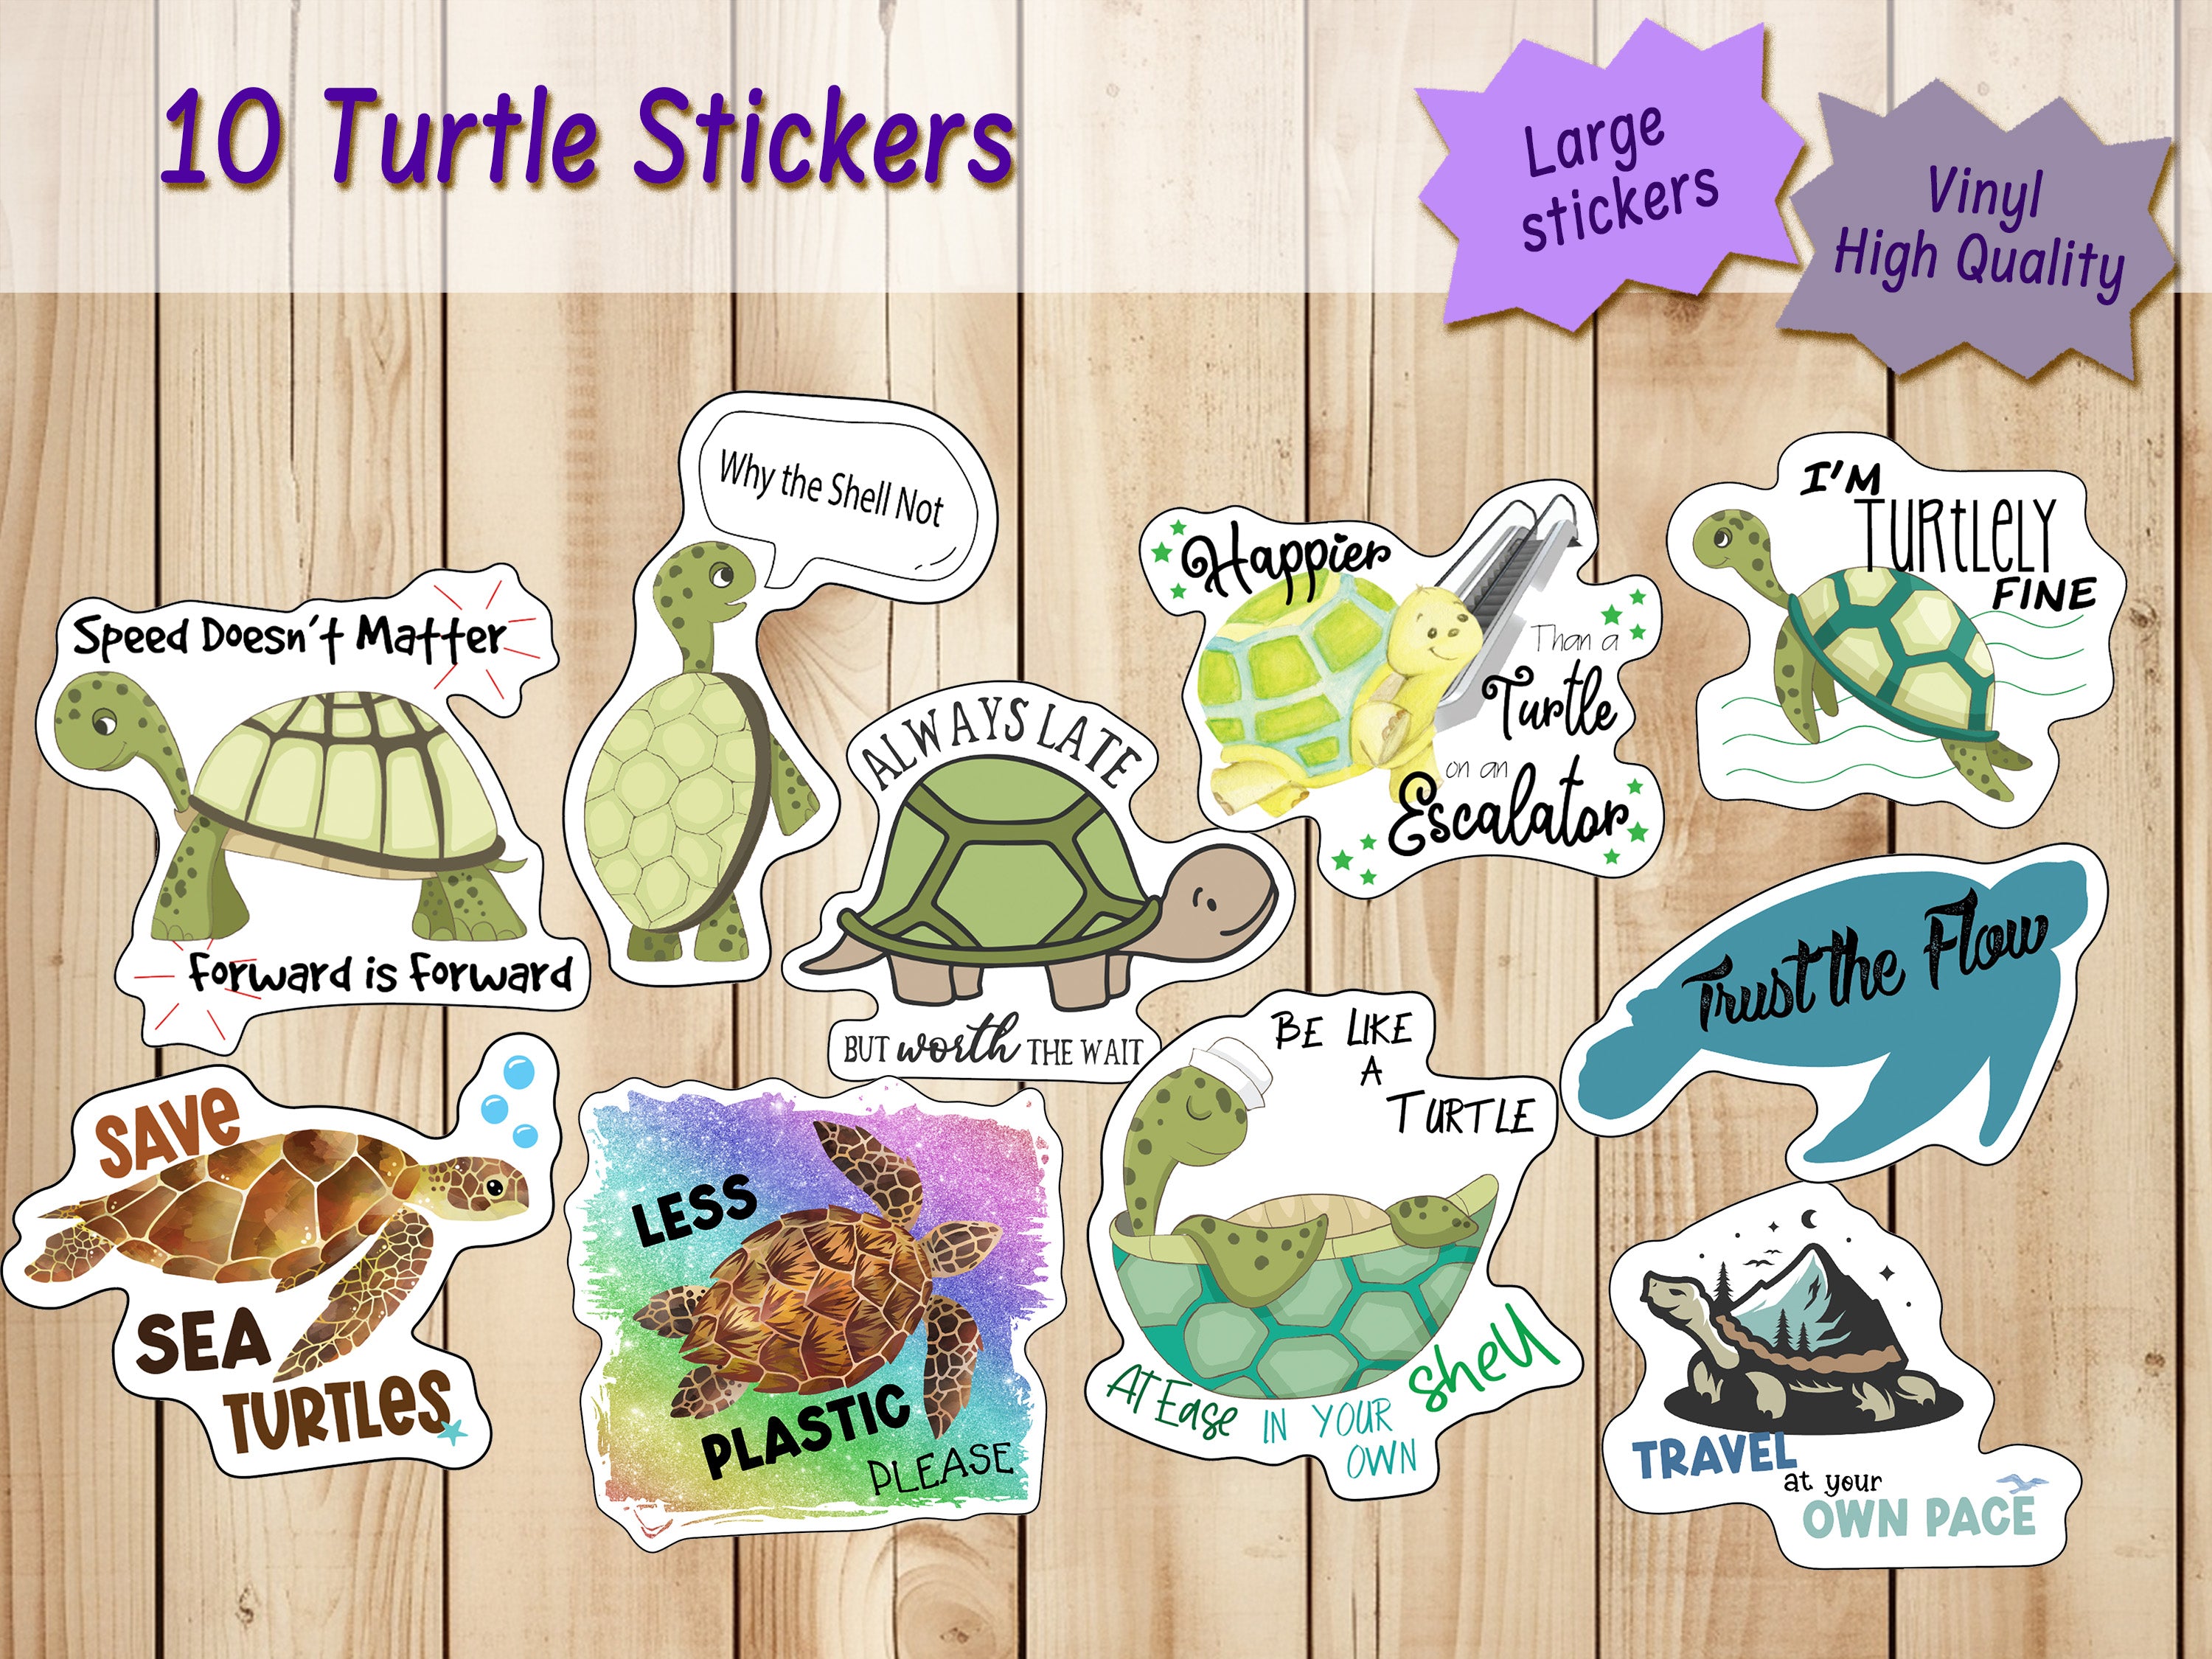 Turtle Stickers